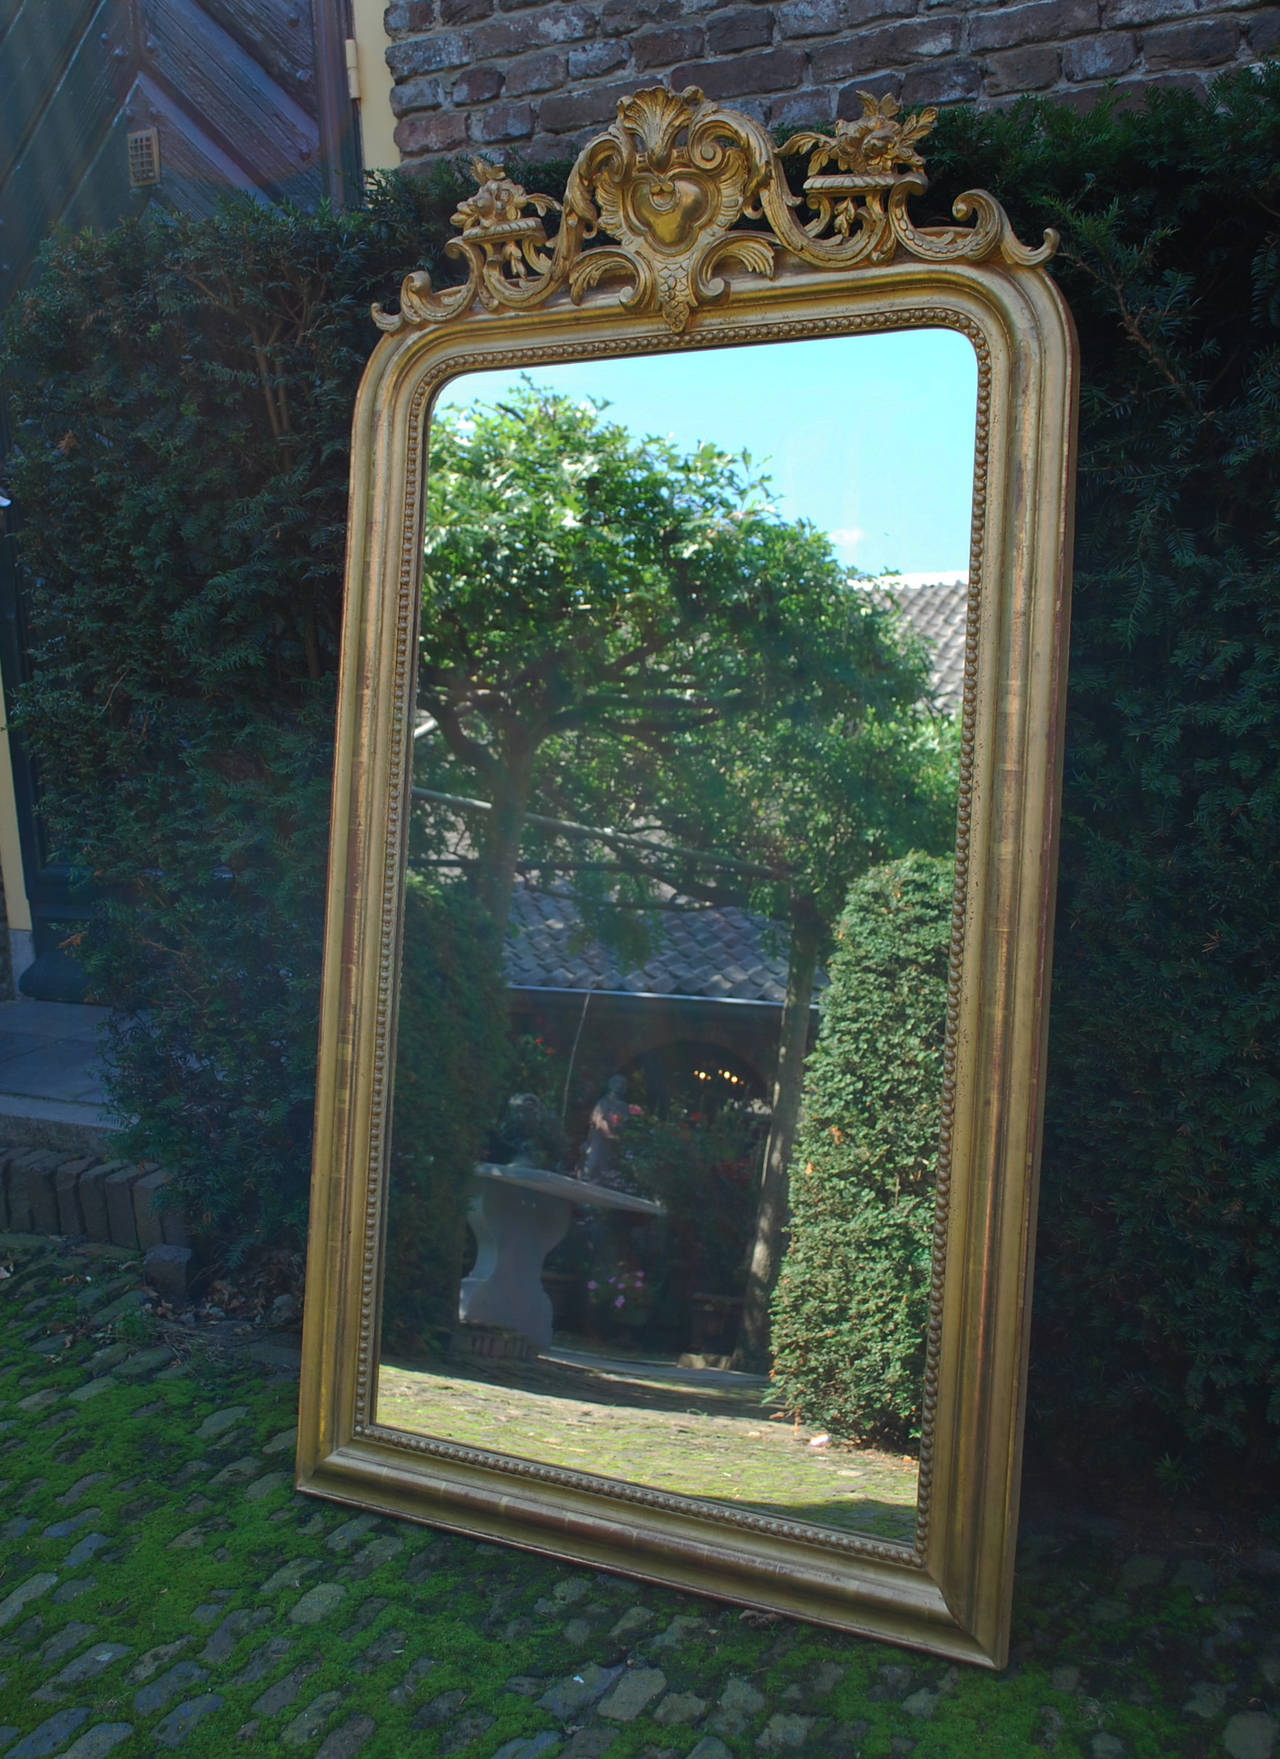 This beautiful antique French mirror with rounded uppers corner and ornate crest has a very strong gold color. Its golden appearance has slight variations in color. The most elevated parts on the frame as well as the crest are made in polished gold